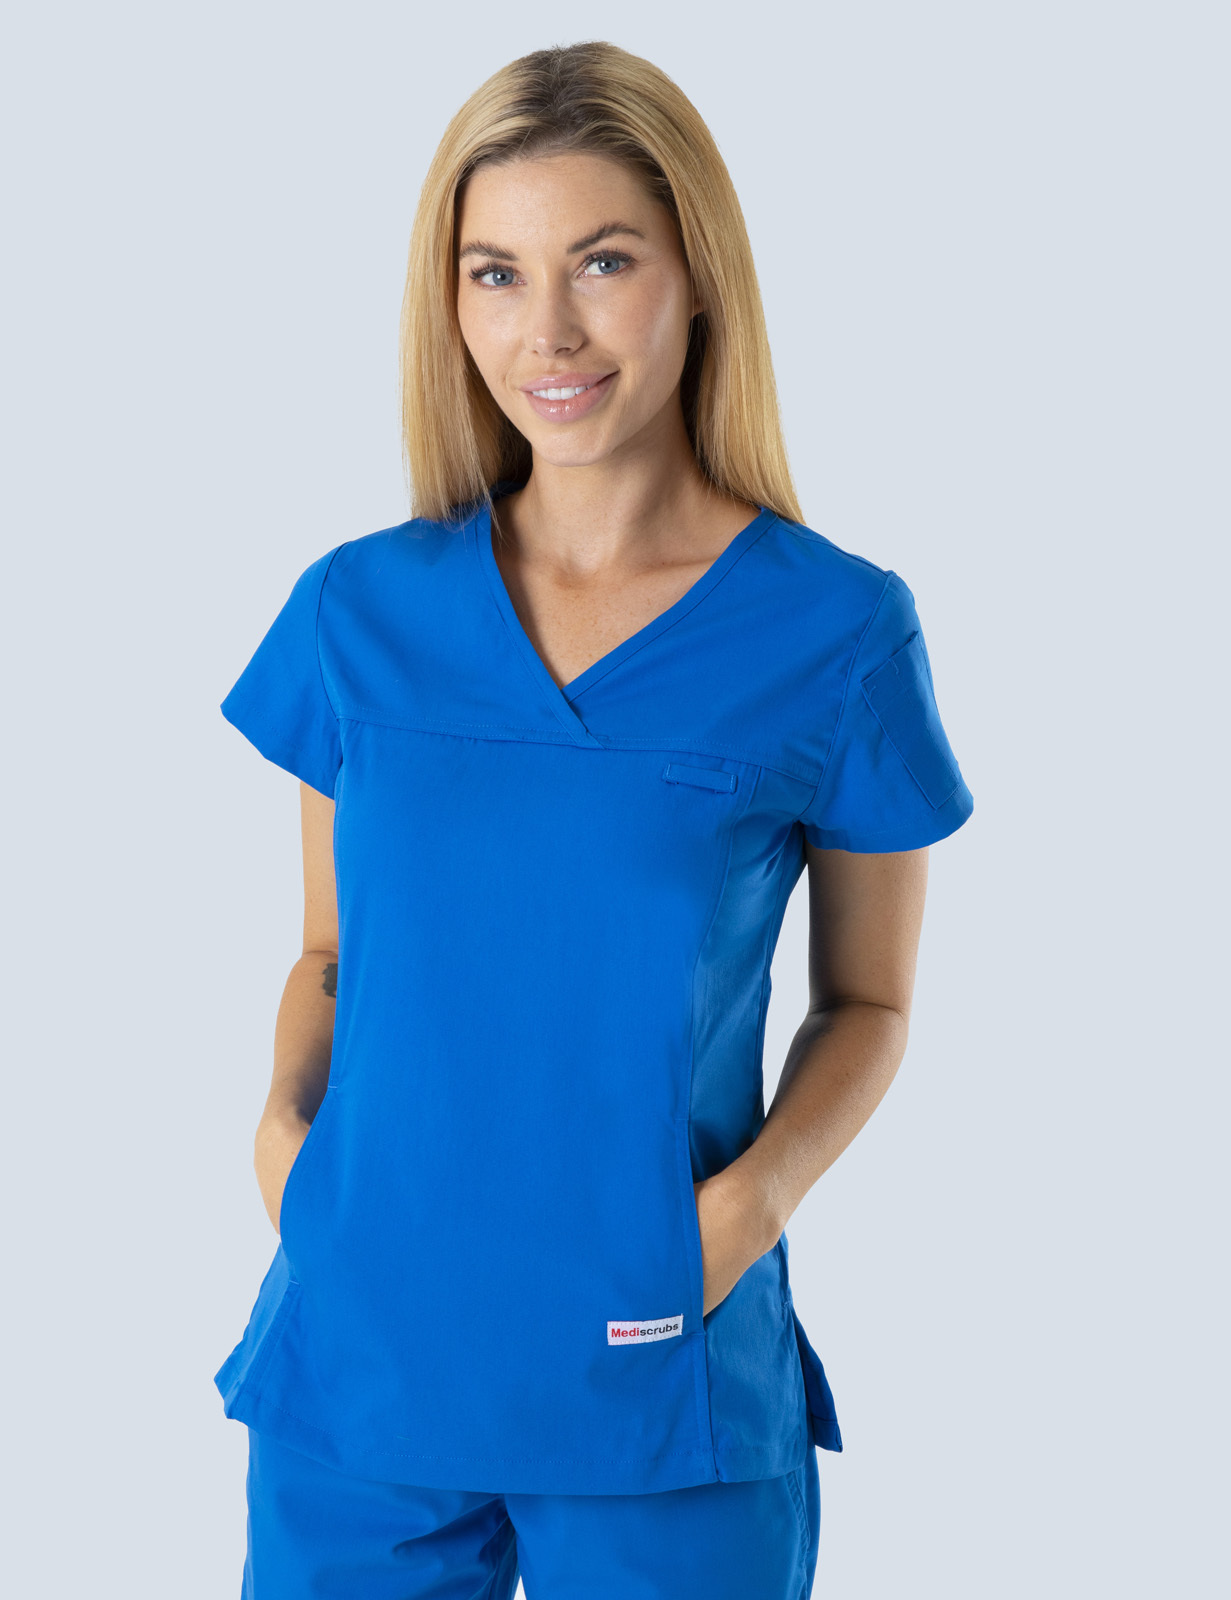 Canberra Hospital - Cardiology Cardiac Technologist (Women's Fit Solid Scrub Top in Royal incl Logos)